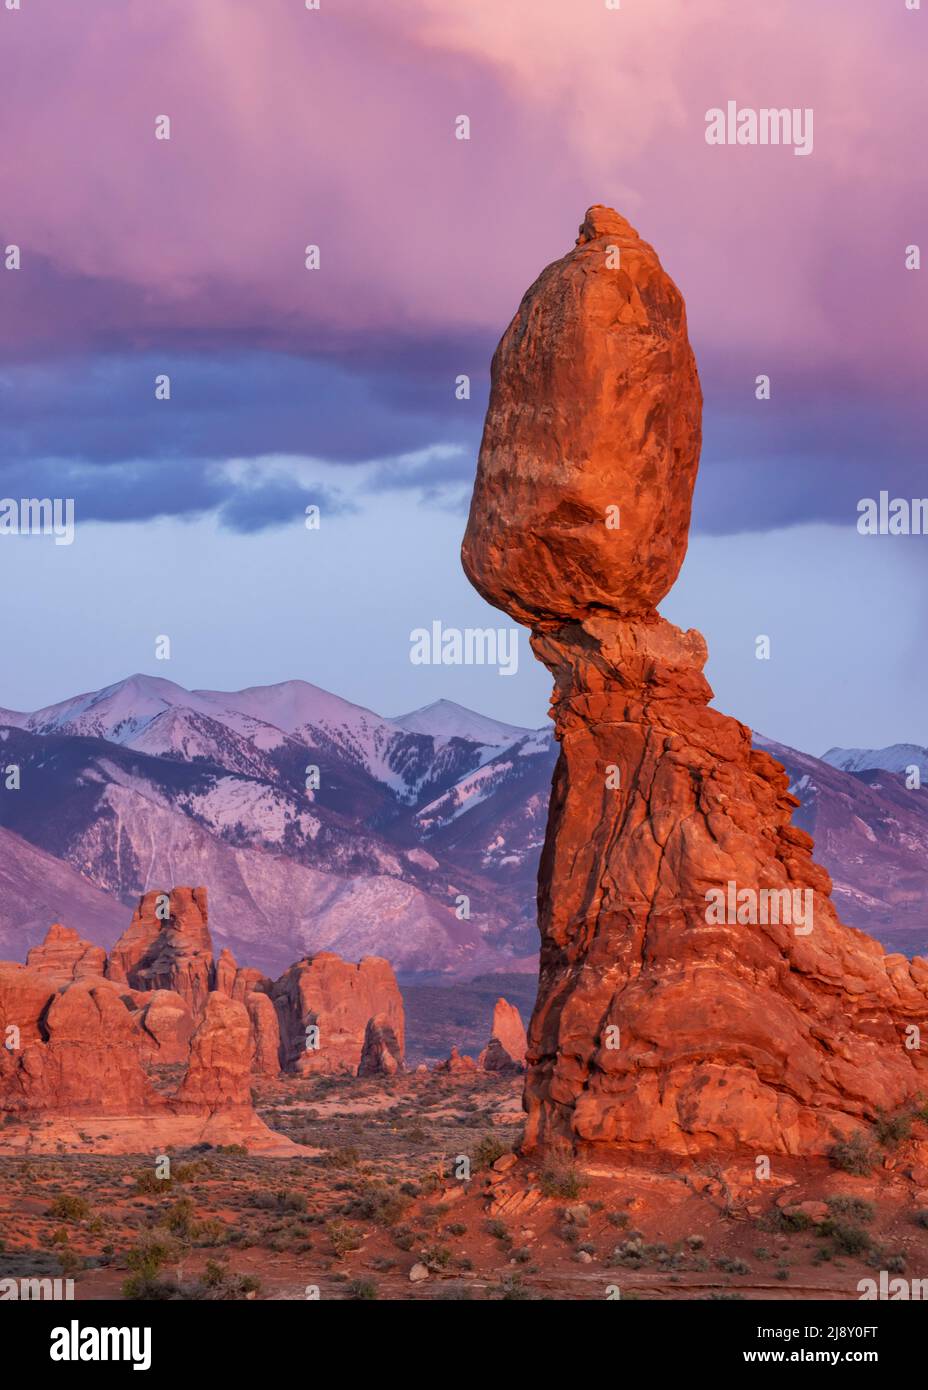 The last of the golden hour light hits balanced rock with the purple La Sal Mountains in the distance, in Arches National Park, Moab, Utah. Stock Photo